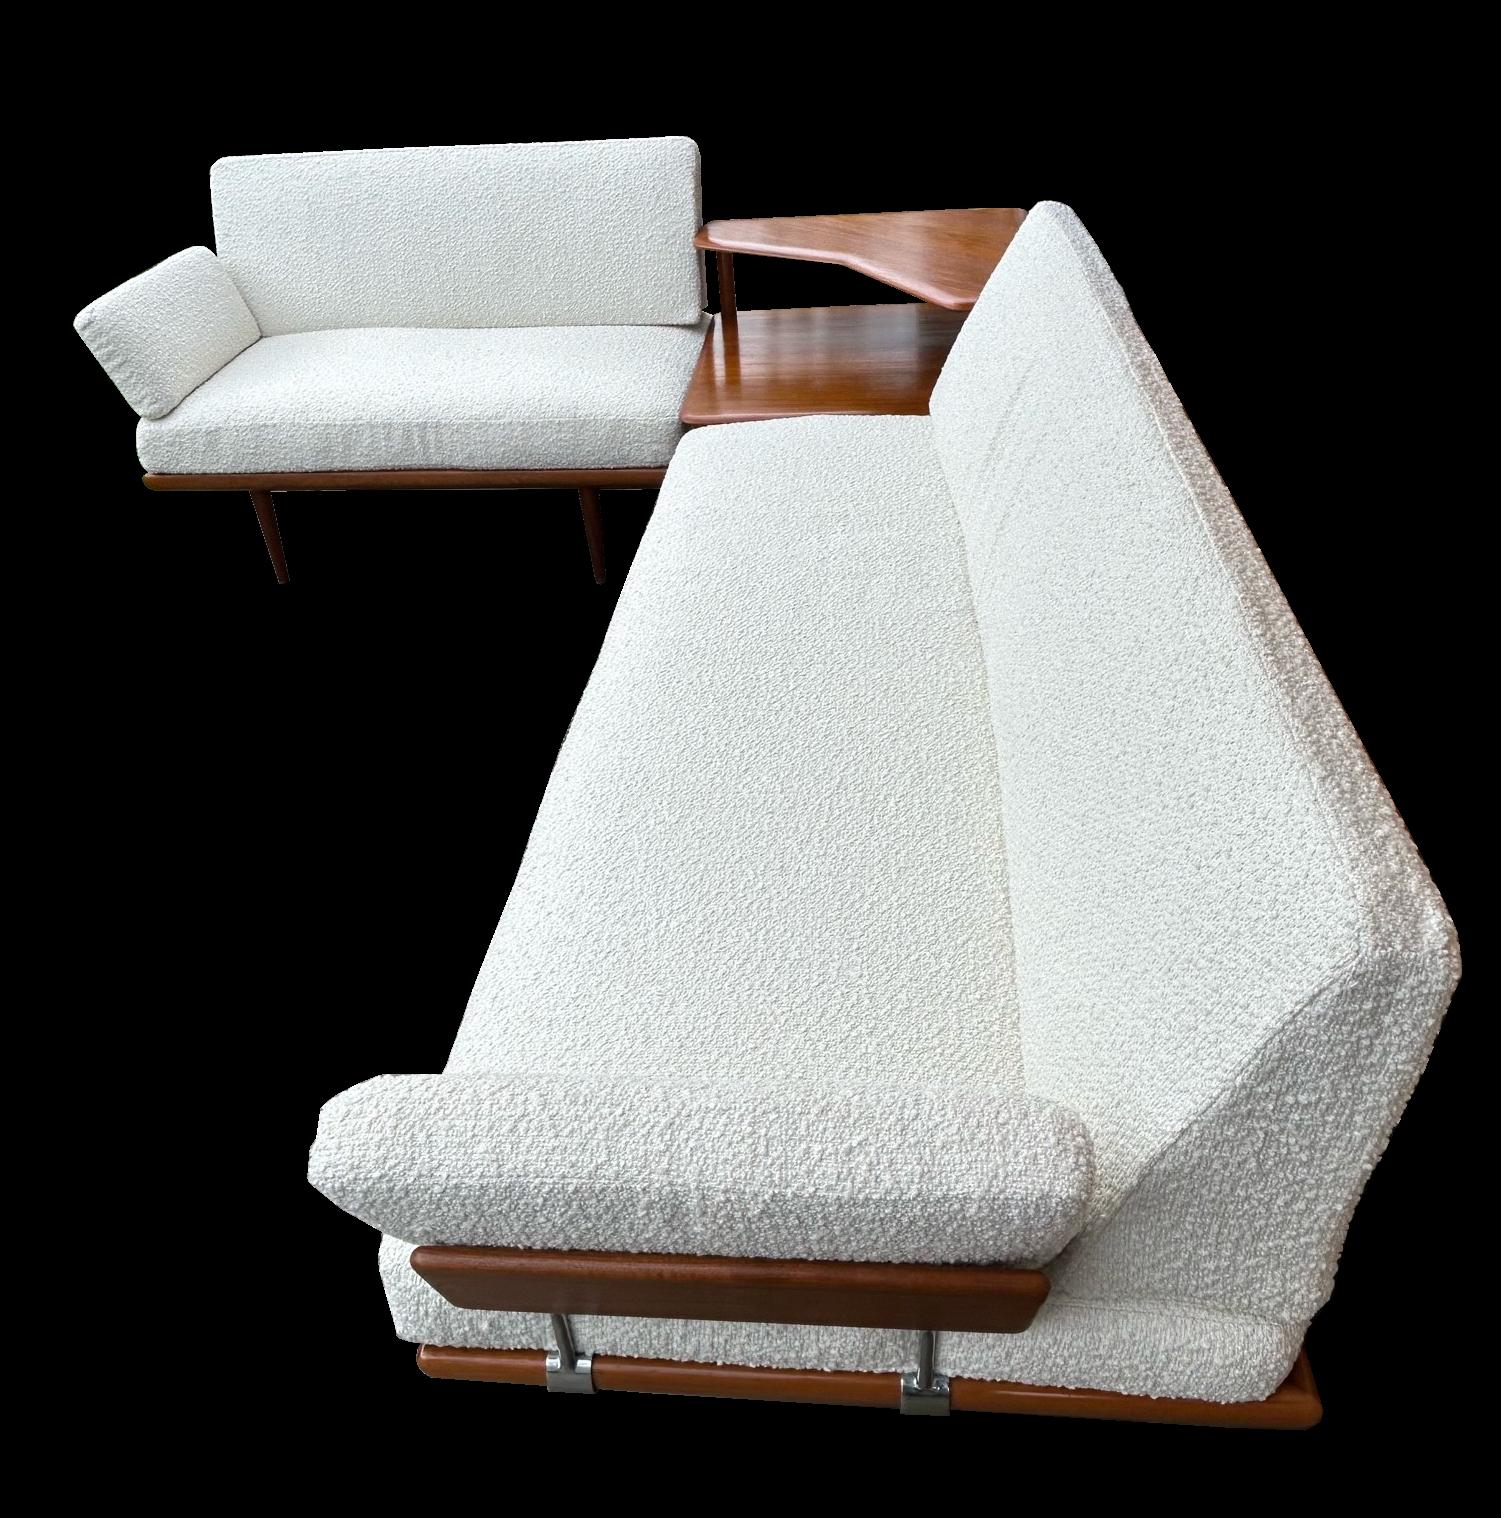 This is a classic original corner suite consisting of a three seat sofa, and a two seat sofa with matching corner two tier table. All produced in finest quality Teak with freshly reupholstered white boucle cushions.
Sizes of the 3-seater sofa: W.